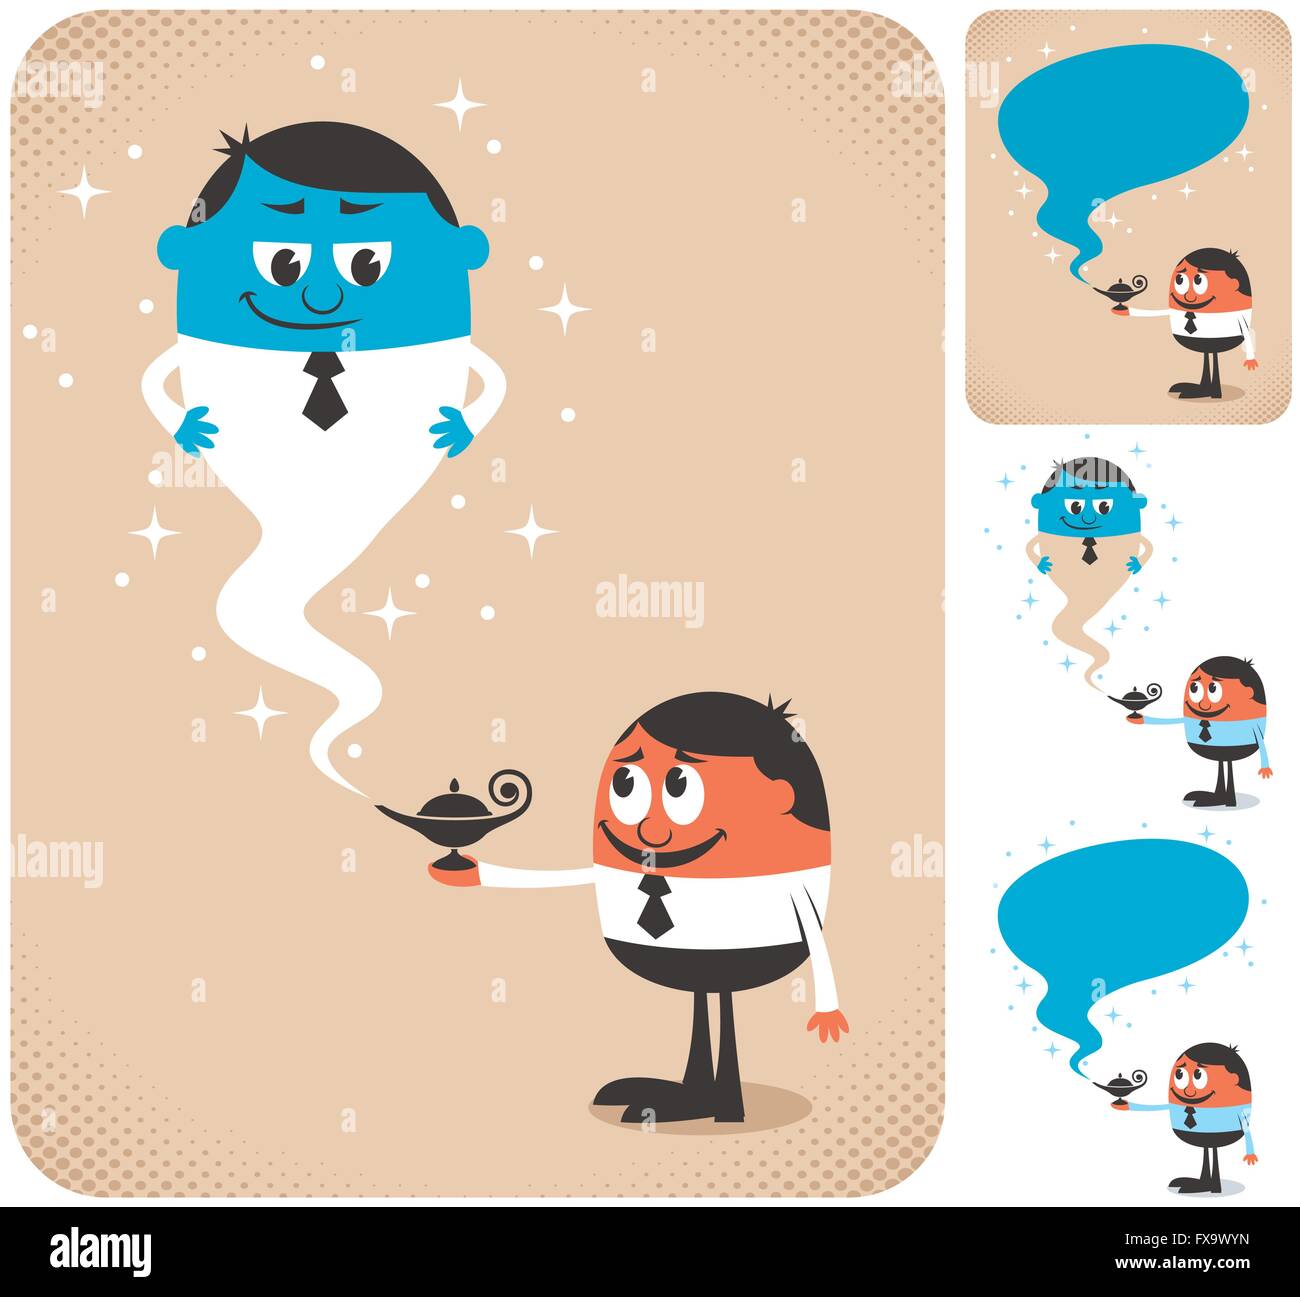 Businessman calling genie to assist him. The illustration is in 4 different versions. Stock Vector